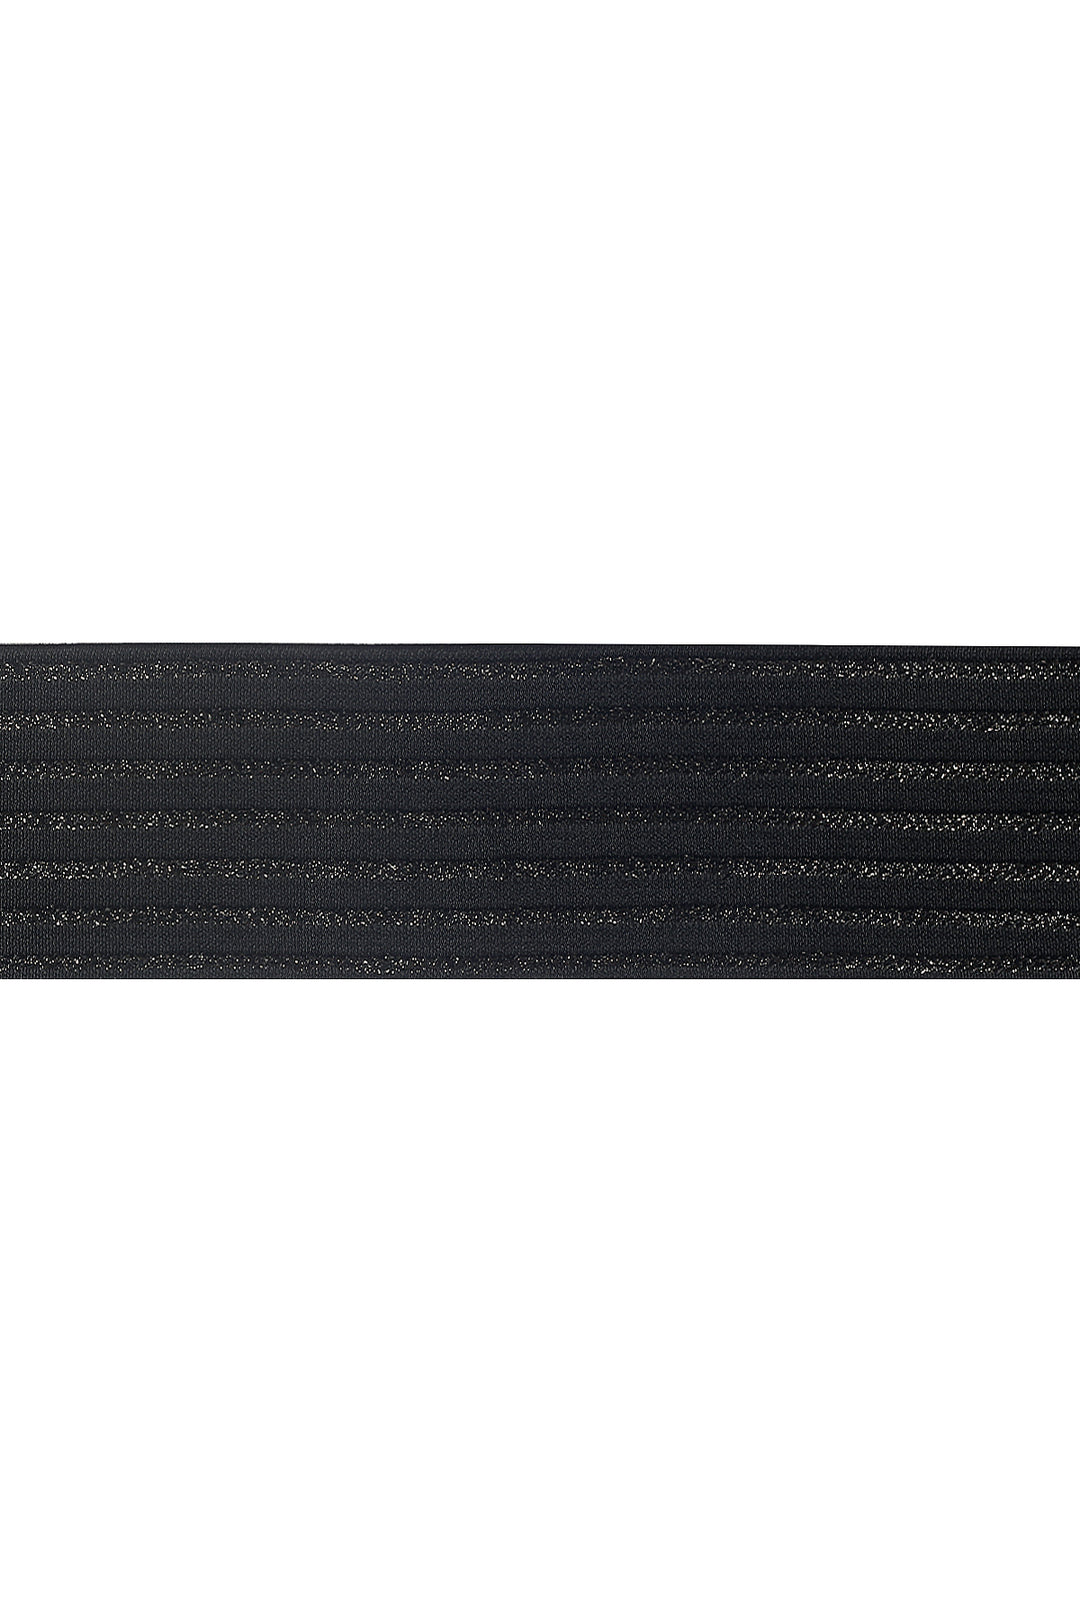 Webbed Polyester Black Knitted Elastic with Black Lurex Threads